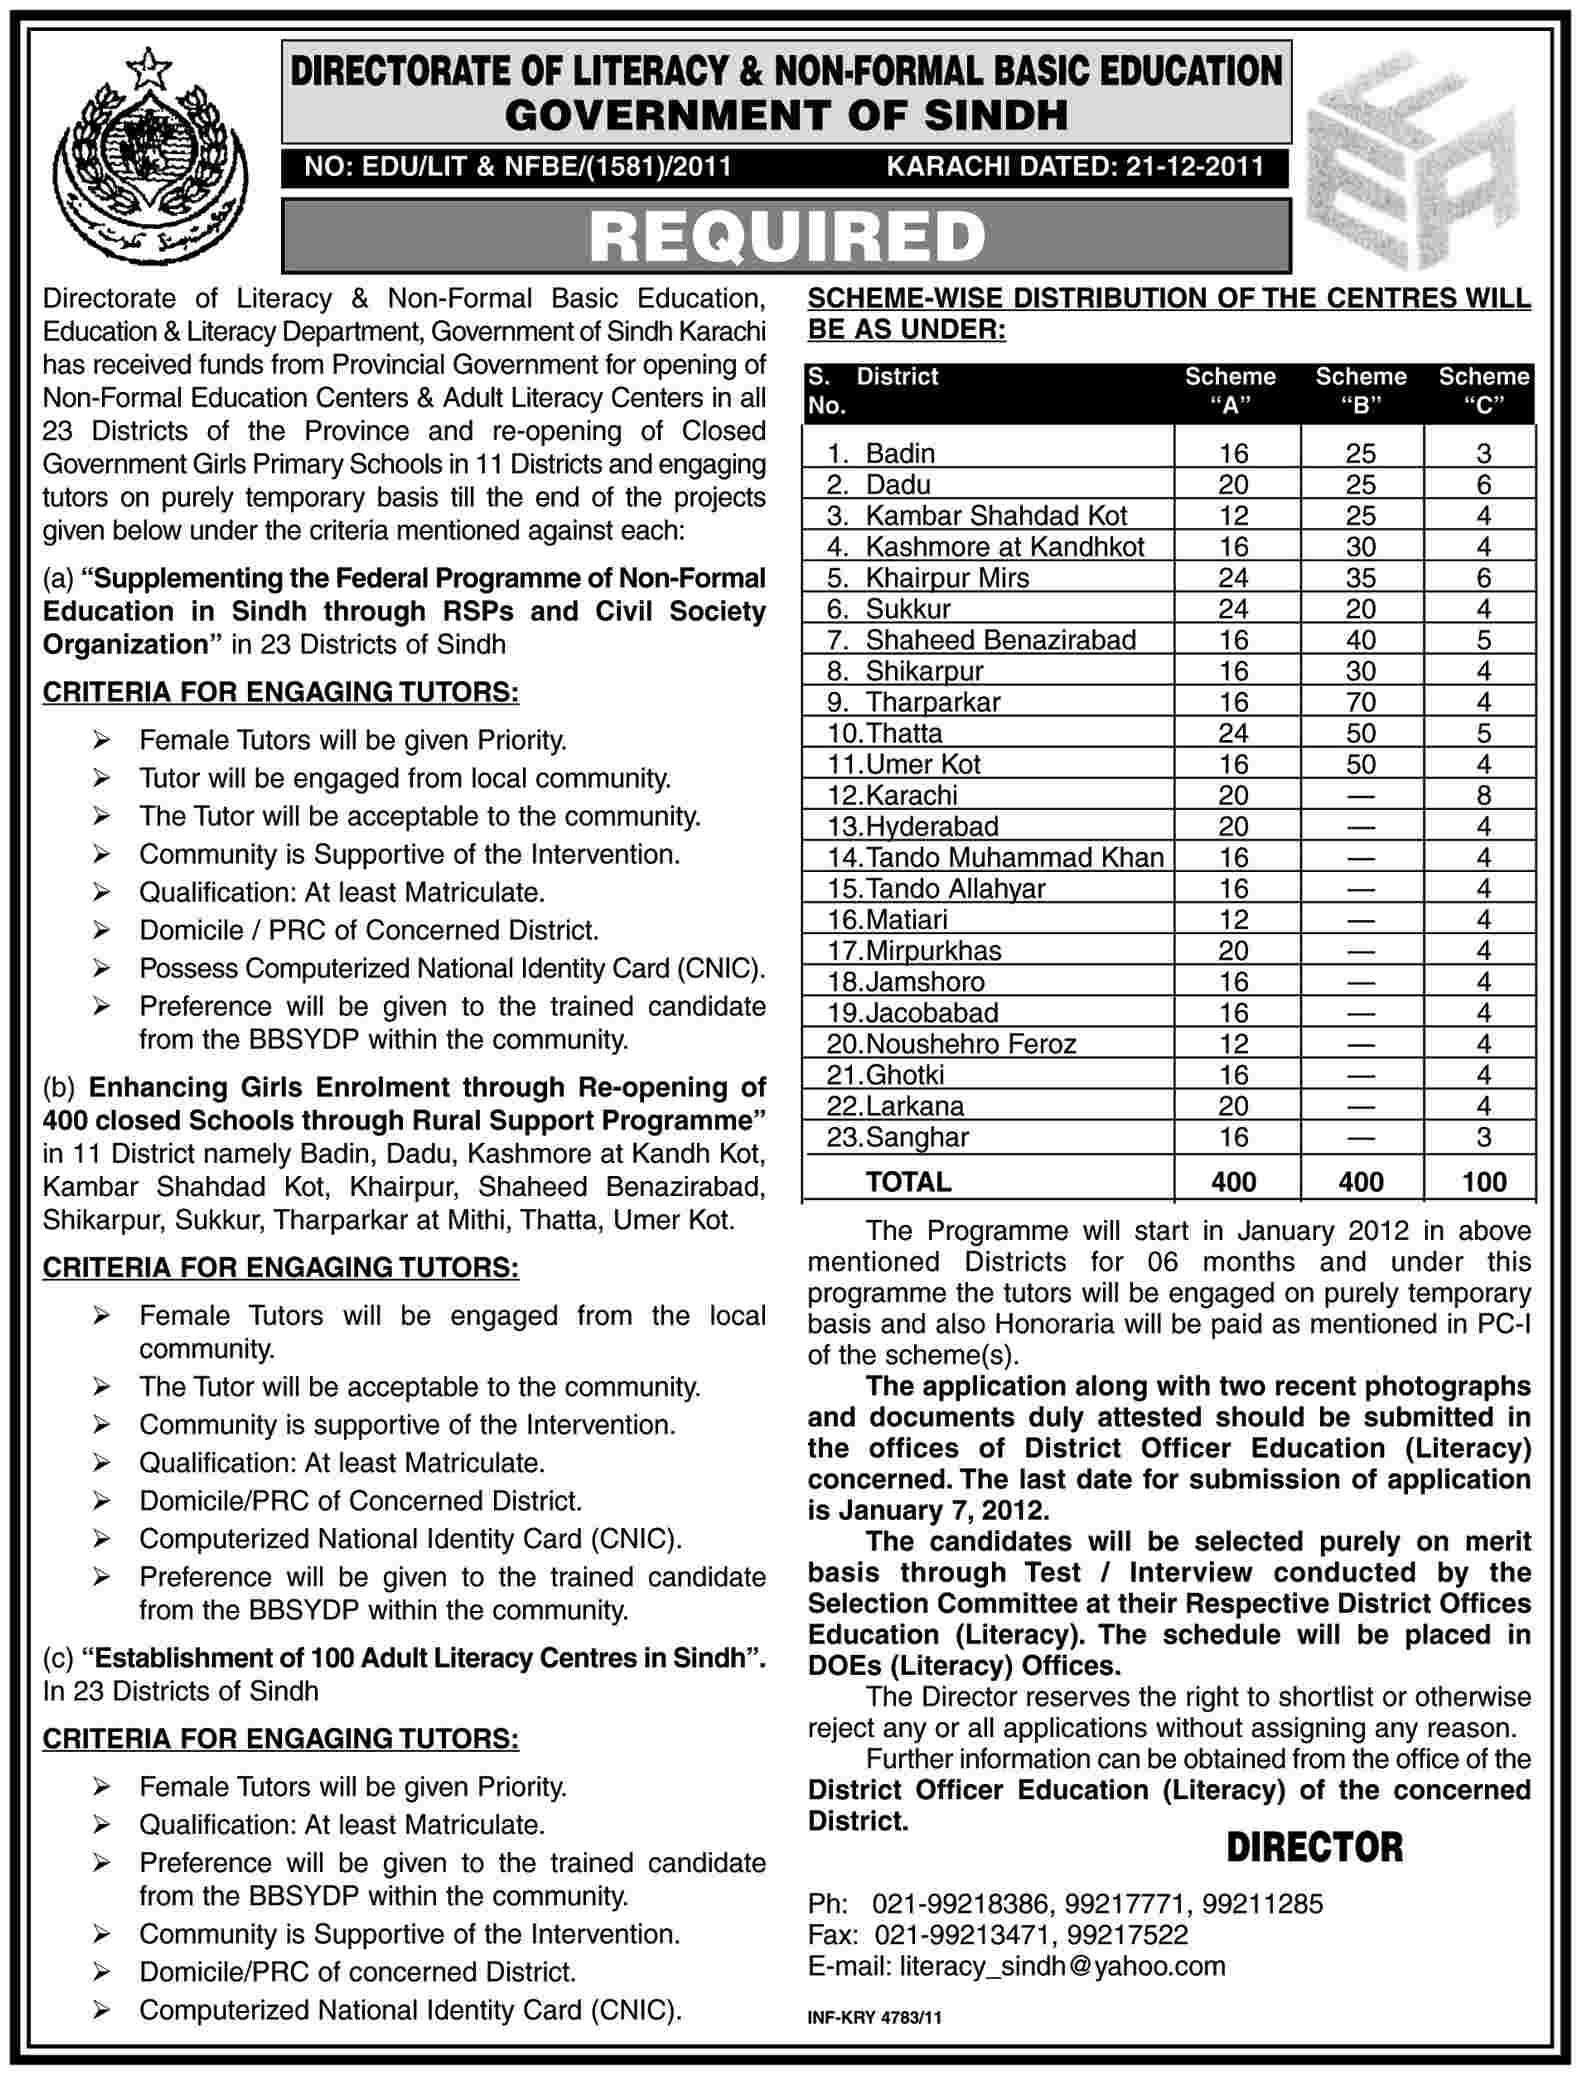 Directorate of Literacy & Non-Formal Basic Education, Government of Sindh Required Tutors